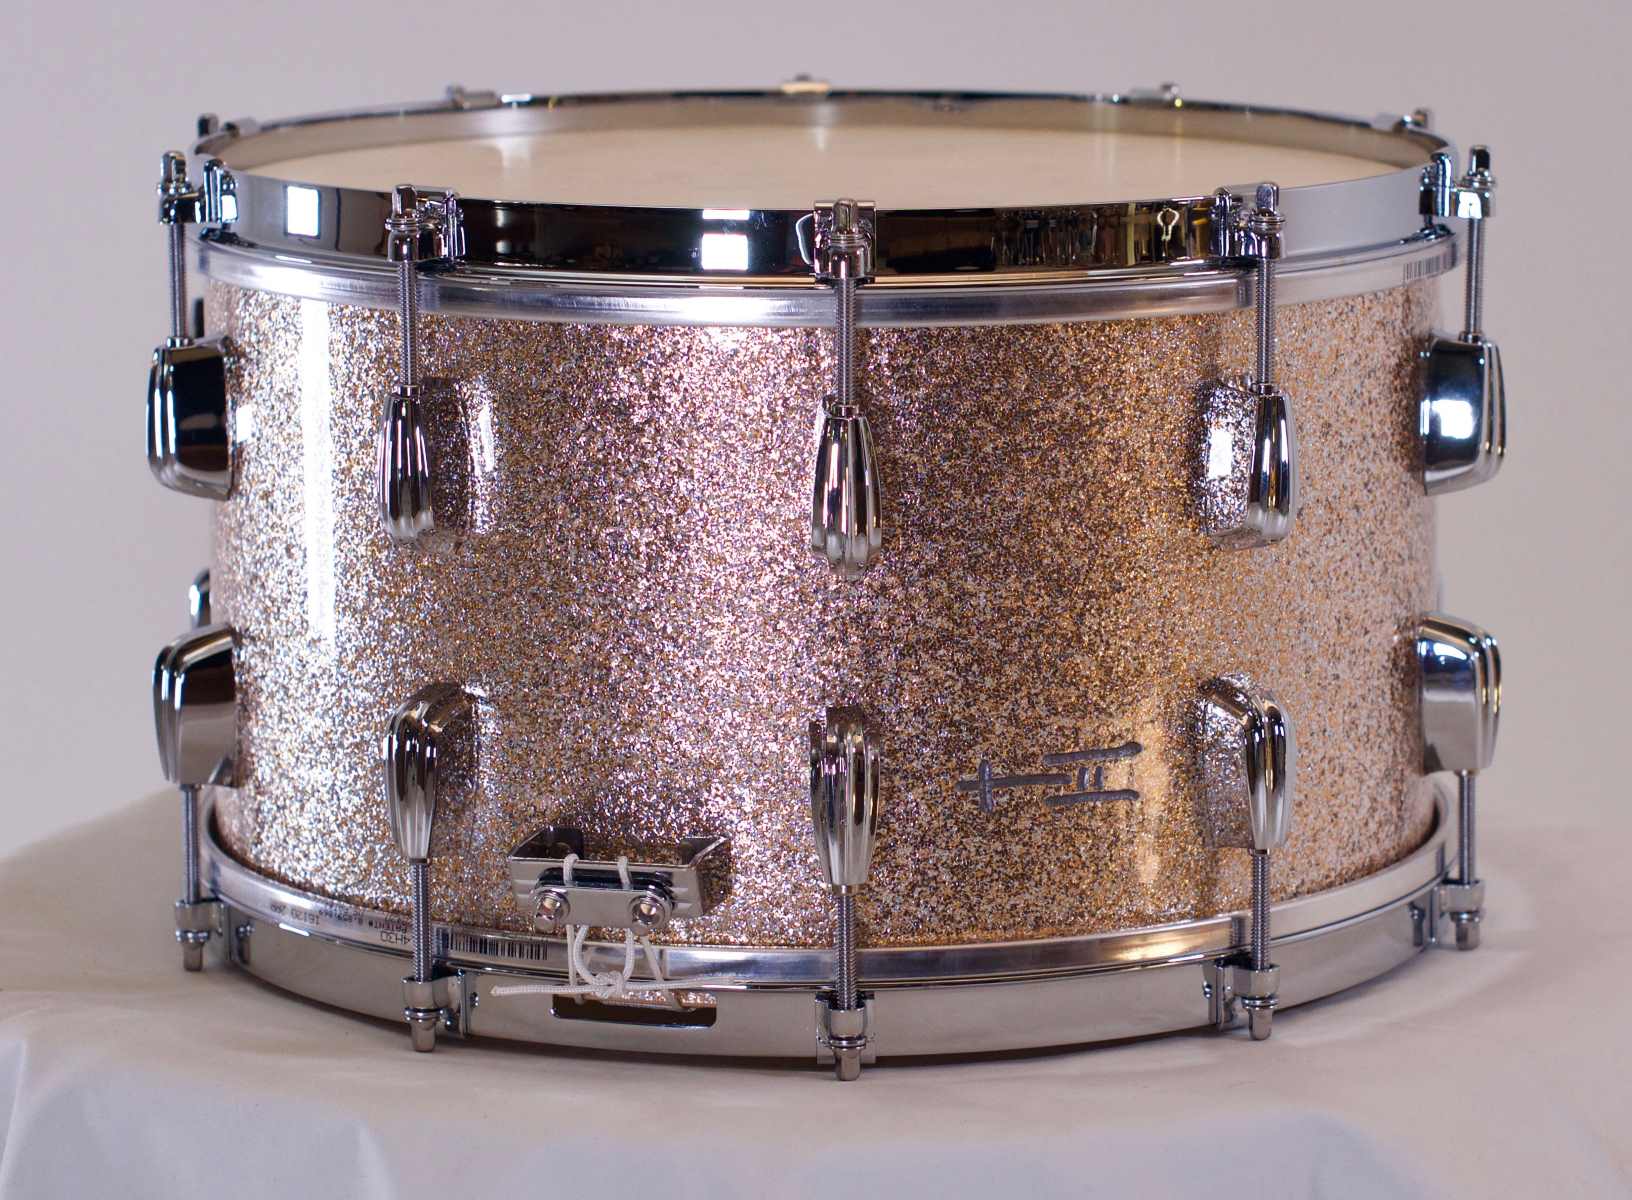 What Drums Have Rounded Bearing Edges